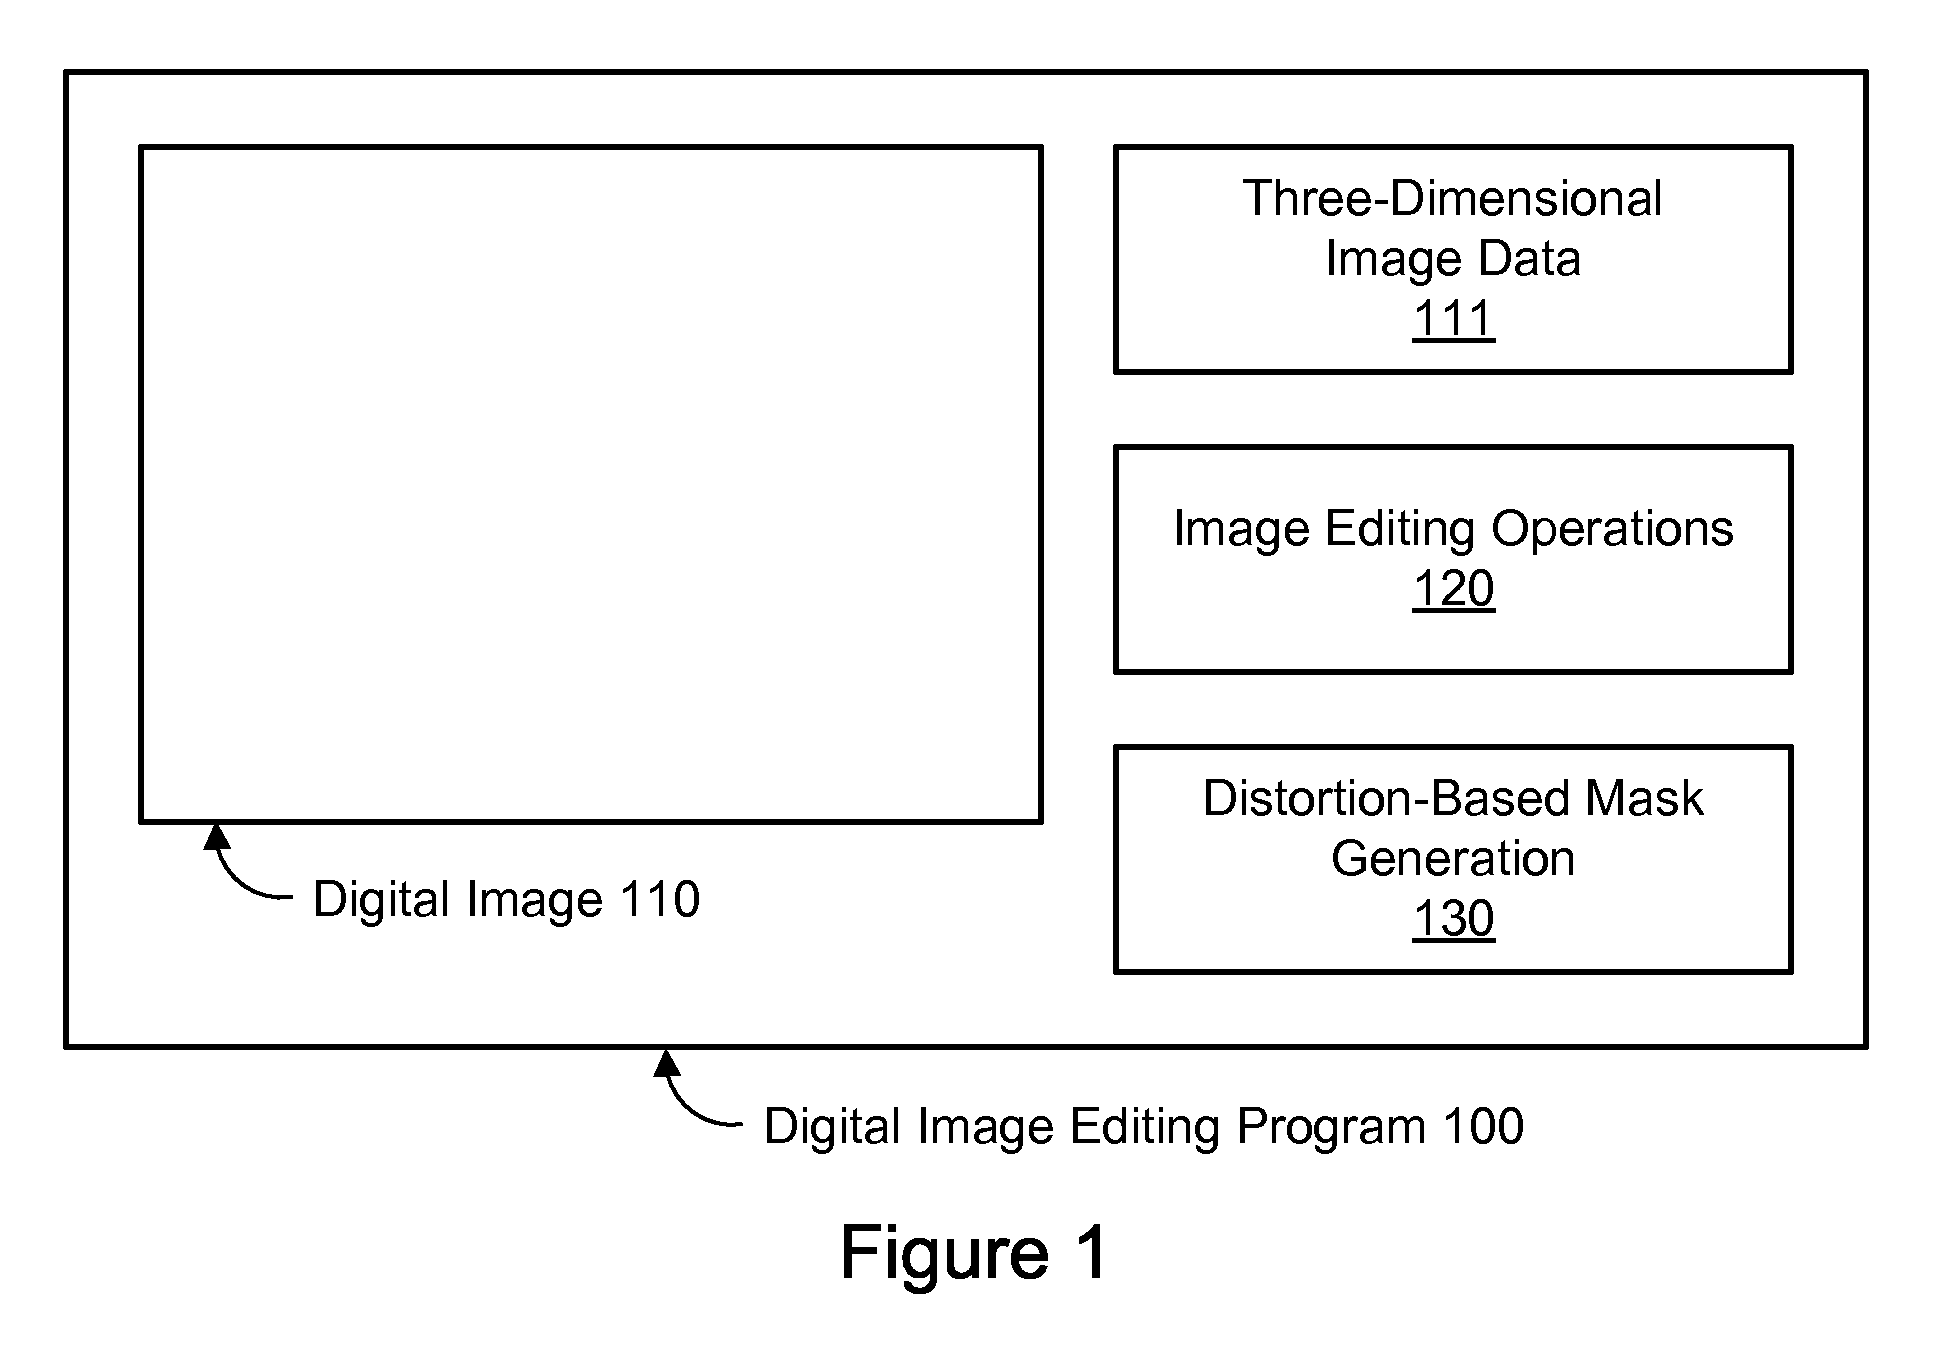 Preventing pixel modification of an image based on a metric indicating distortion in a 2d representation of a 3D object